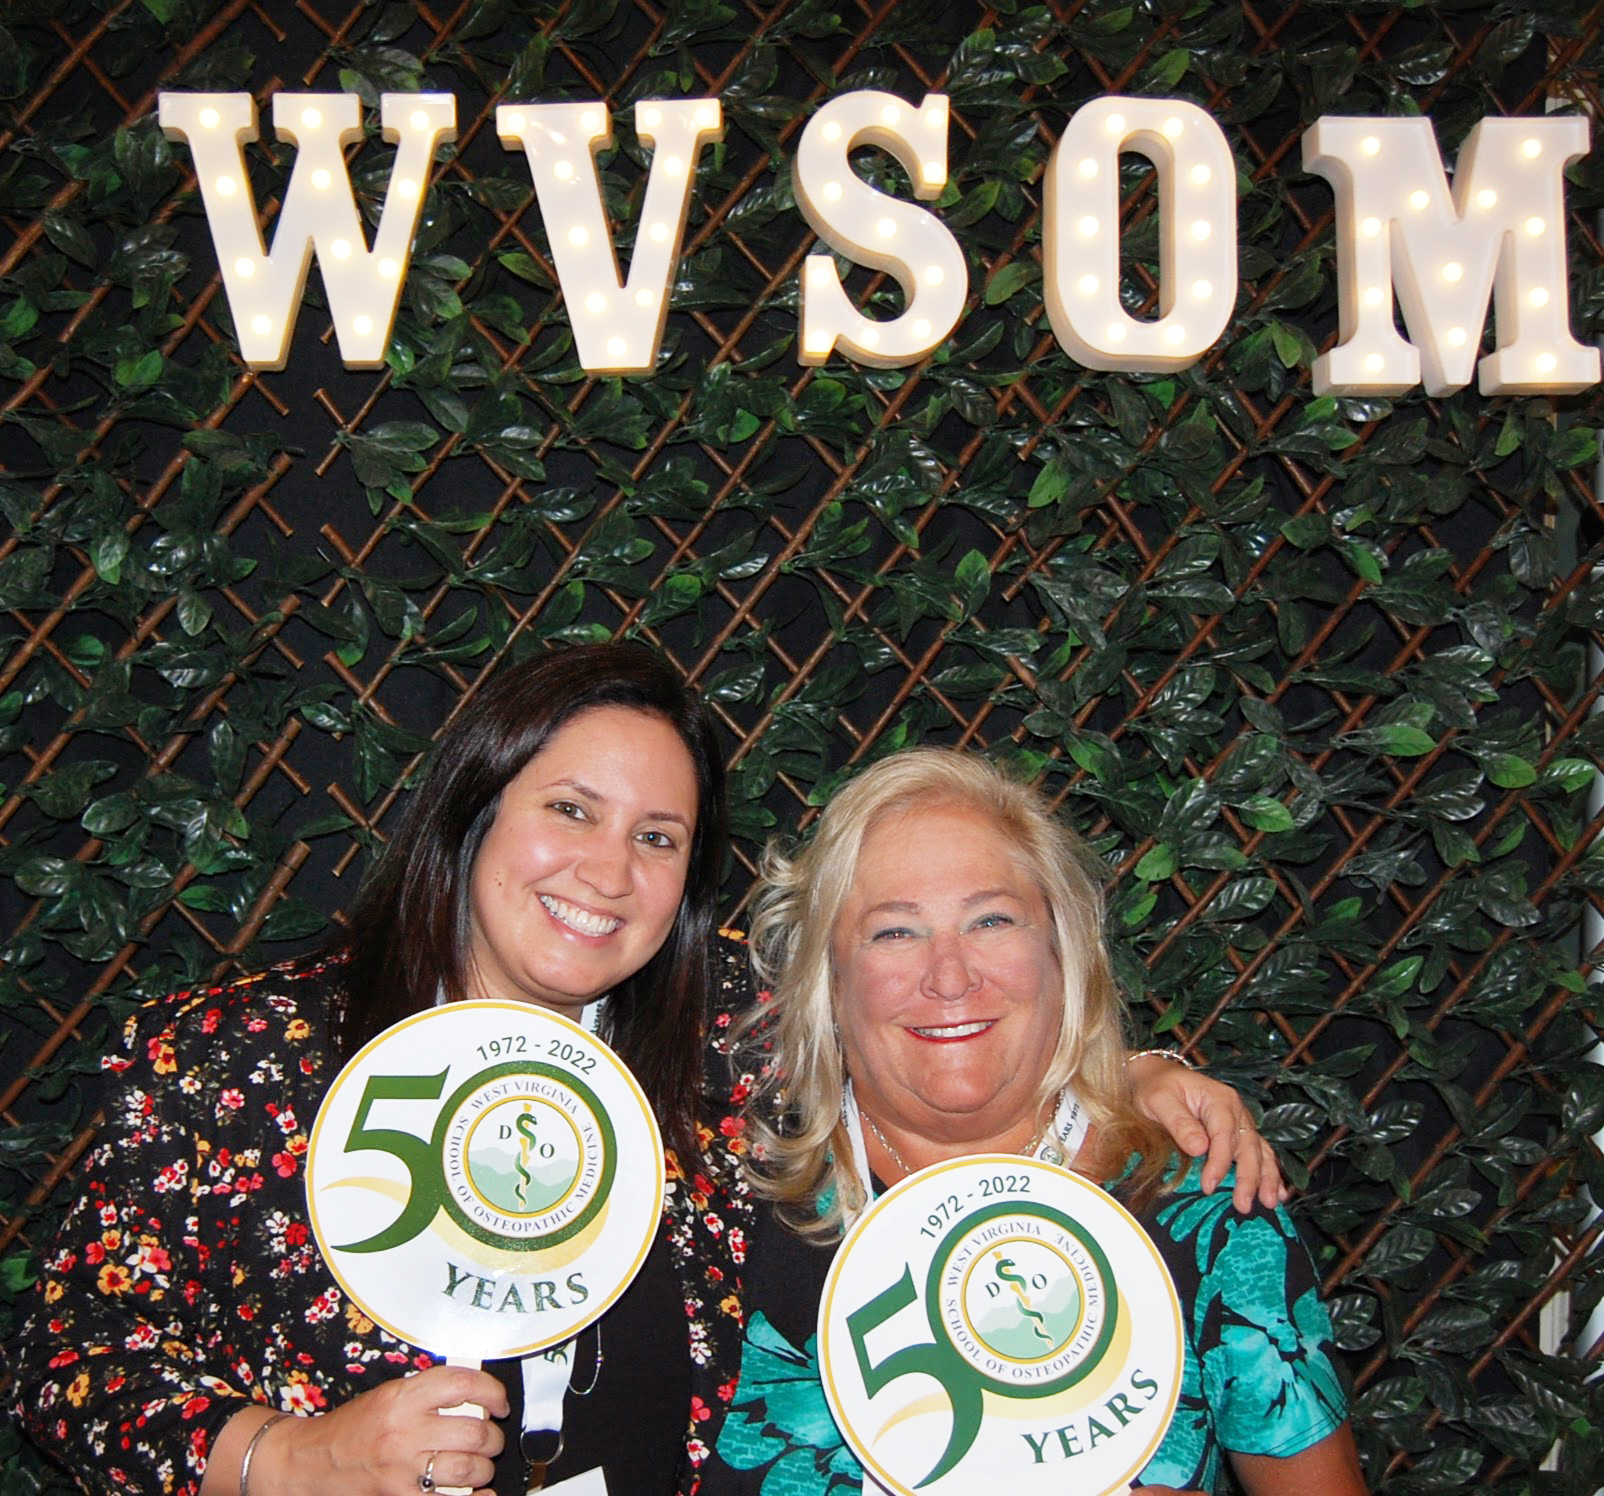 SWC Managing Director, Alicia Luckton with another attendee posed under WVSOM light sign